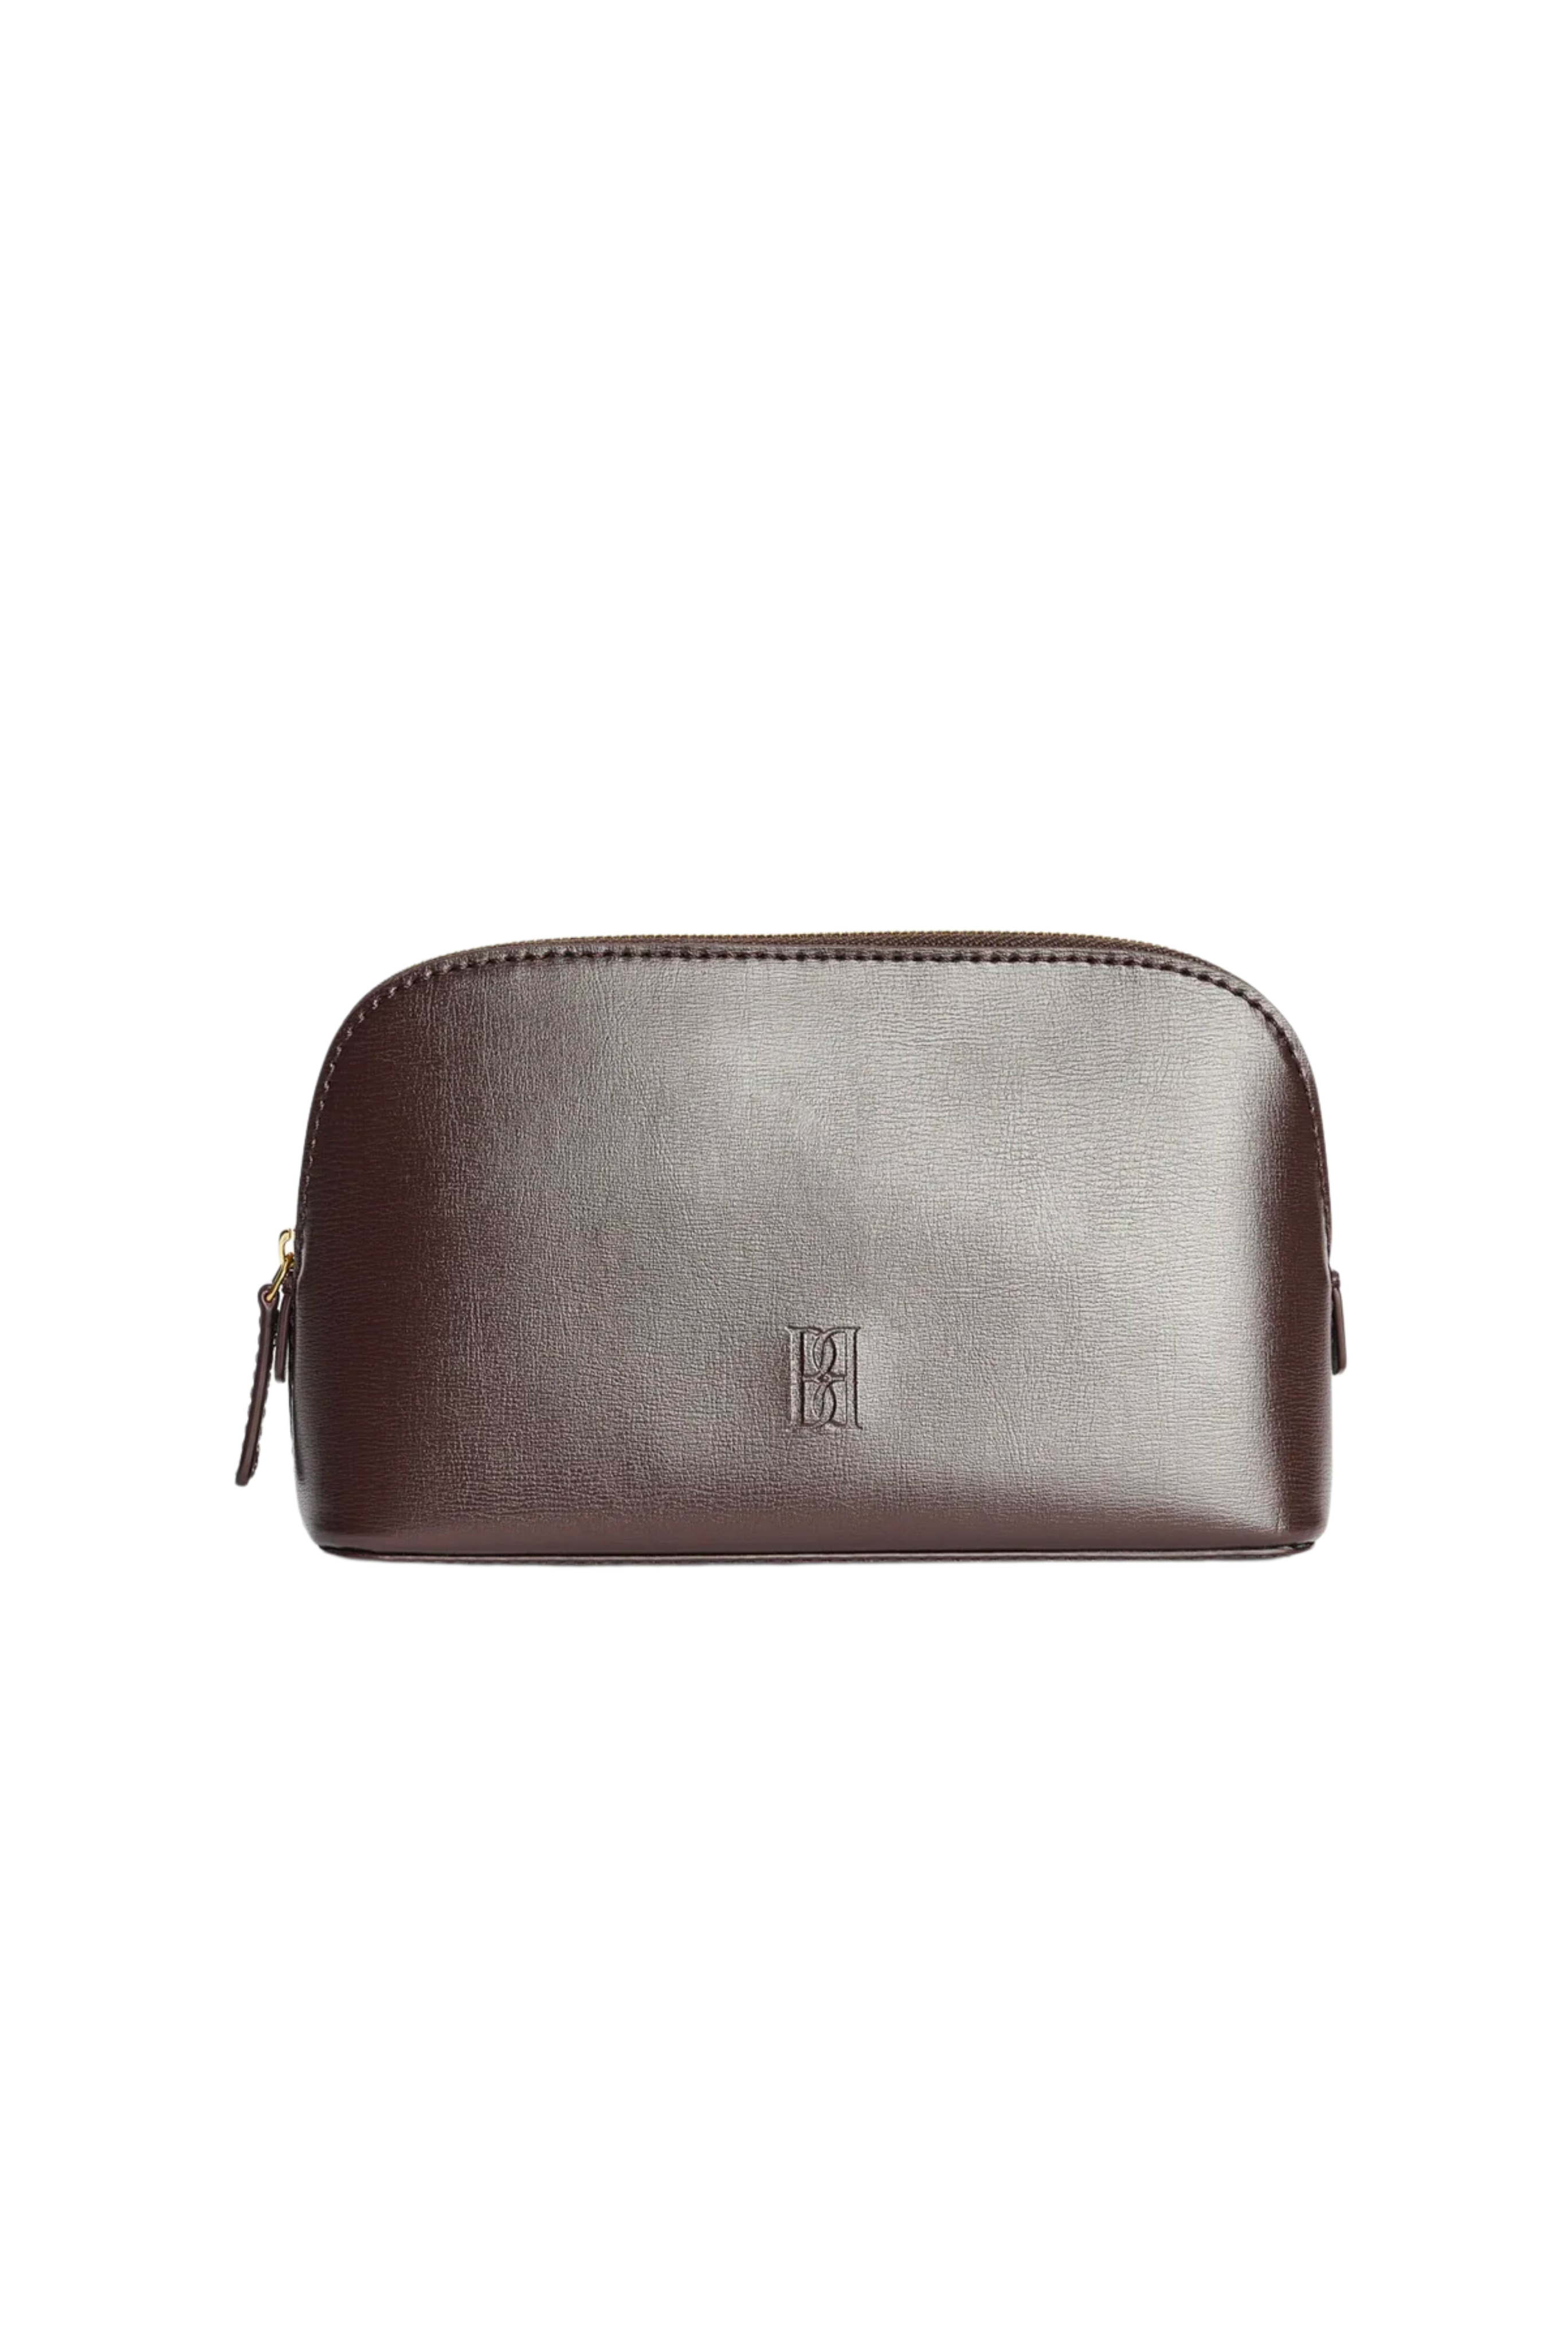 BY MALENE BIRGER Aya Small Makeup Pouch